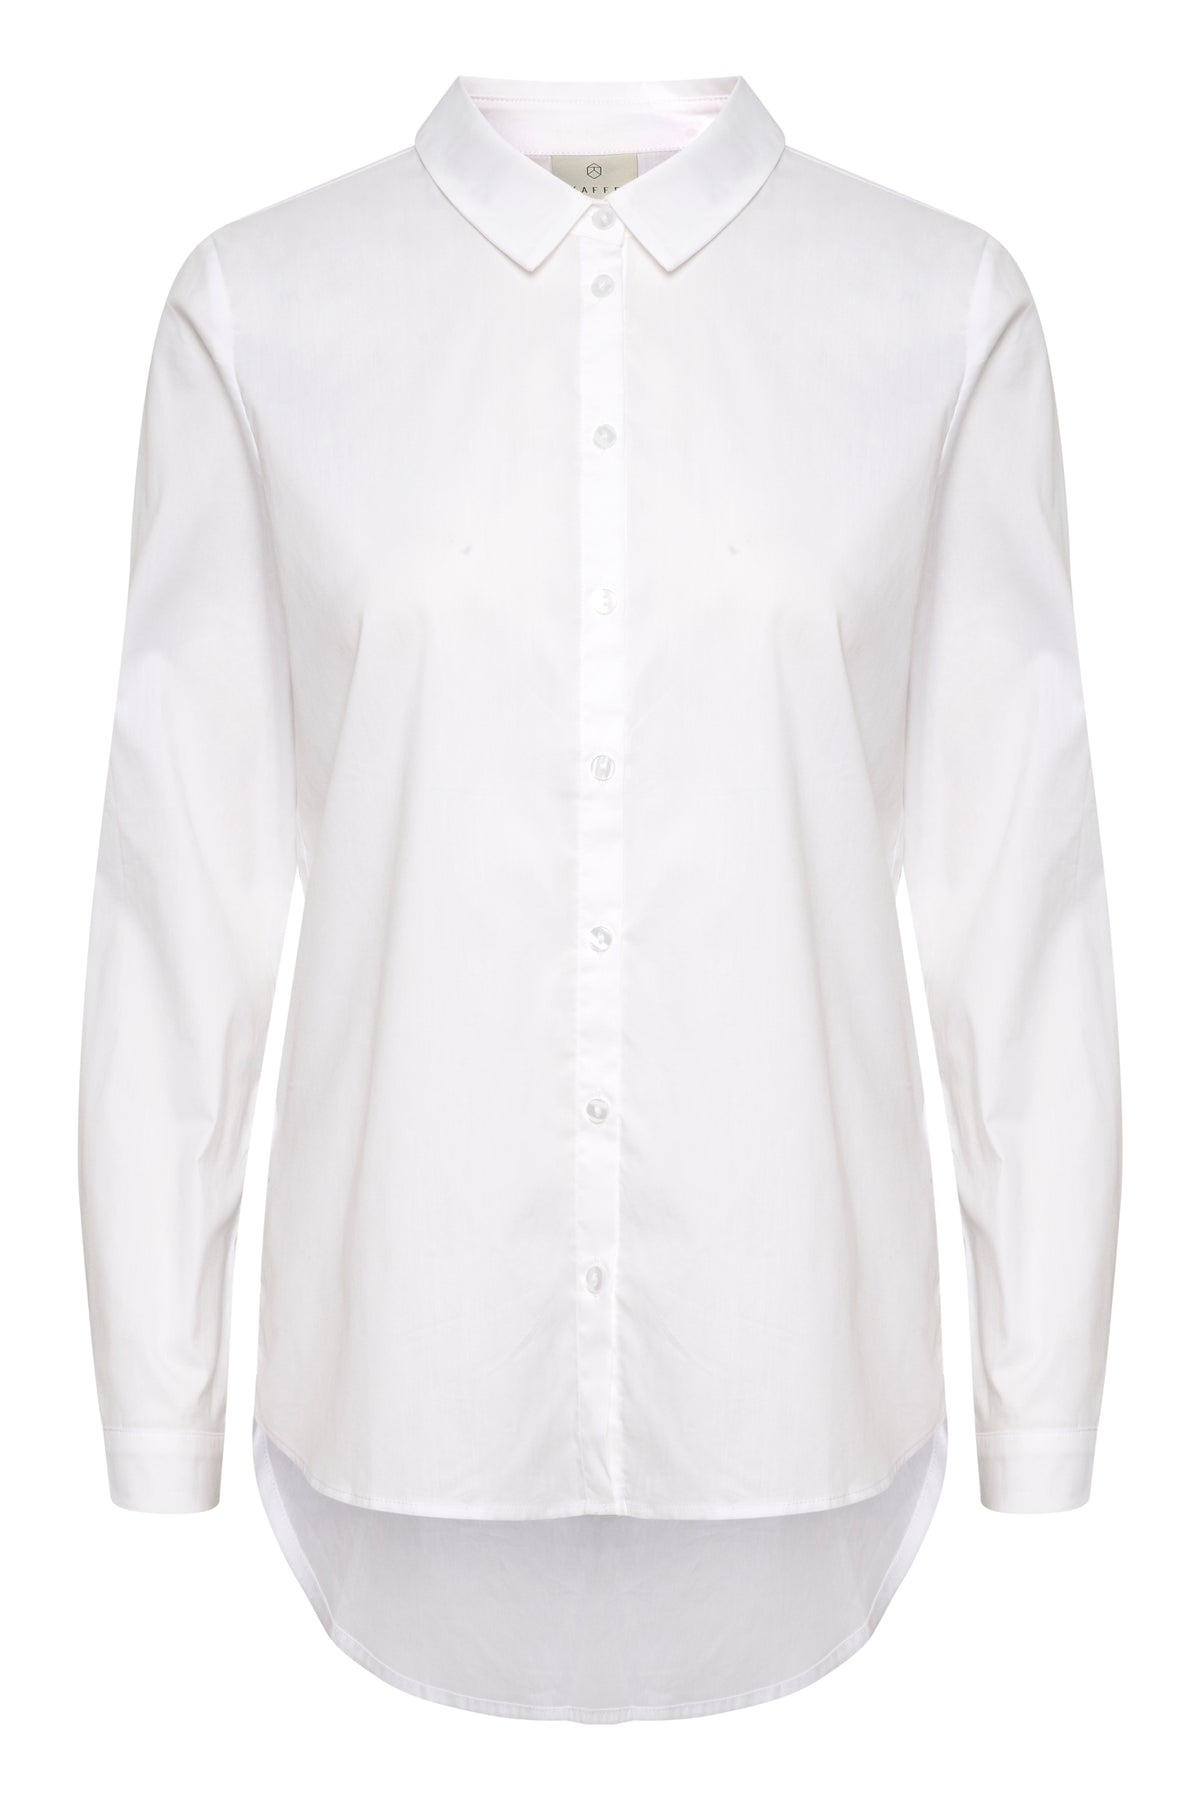 Kaffe Kascarlet Optical White Fitted Layering Shirt, 10504242